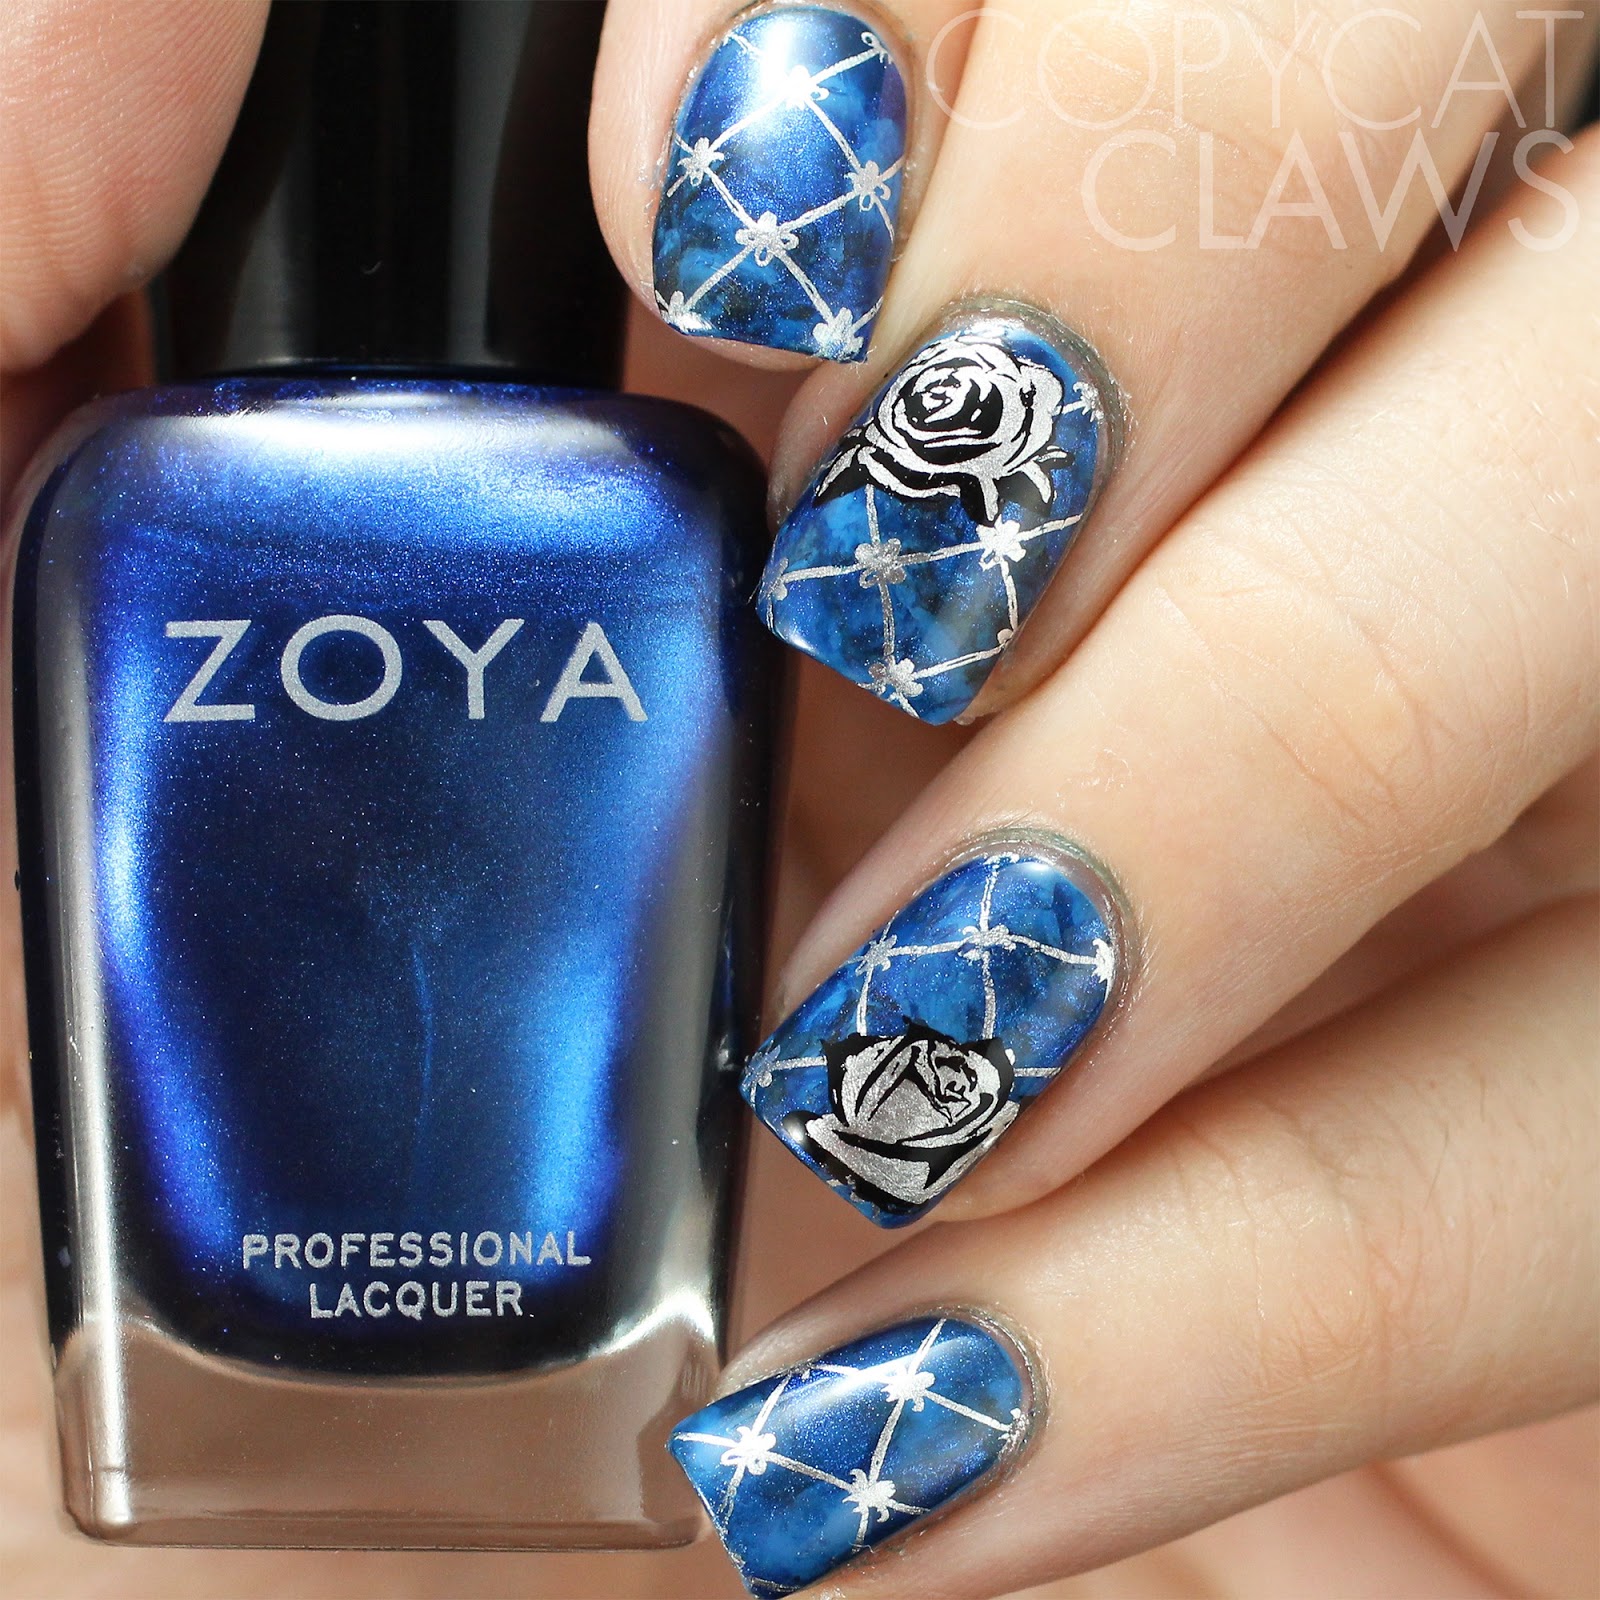 Copycat Claws: 26 Great Nail Art Ideas - Blue and Silver